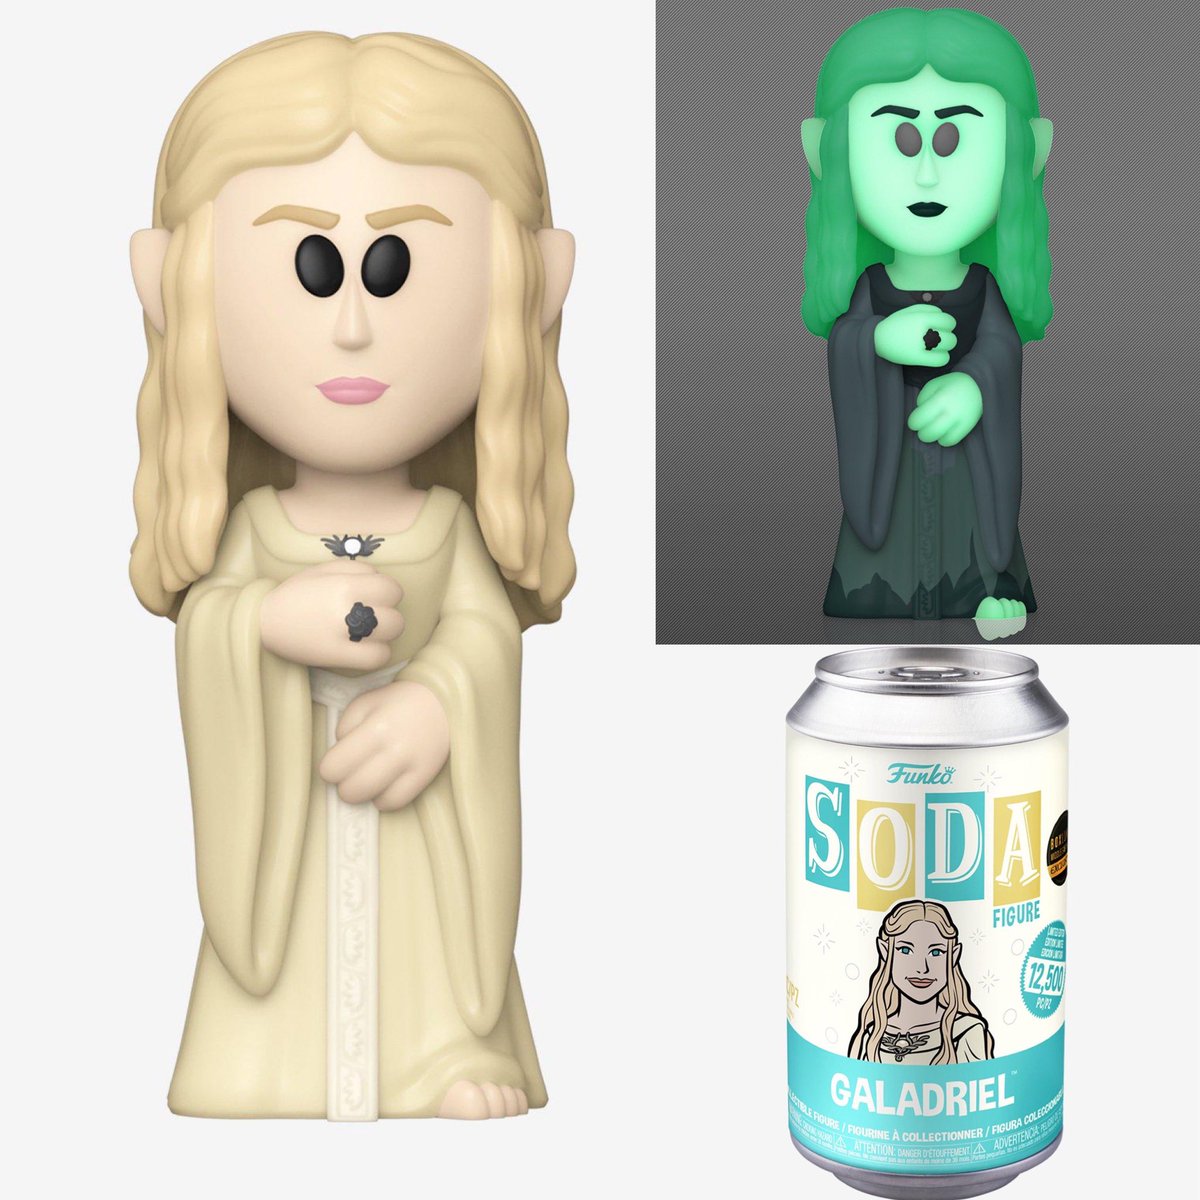 Available Now: BoxLunch exclusive Galadriel Soda! Use code 9DW22FDG for 25% off. #Ad #LordoftheRings . distracker.info/3wuoQAX . #LOTR #Funko #FunkoPop #FunkoPopVinyl #Pop #PopVinyl #Collectibles #Collectible #FunkoCollector #FunkoPops #Collector #Toy #Toys #DisTrackers